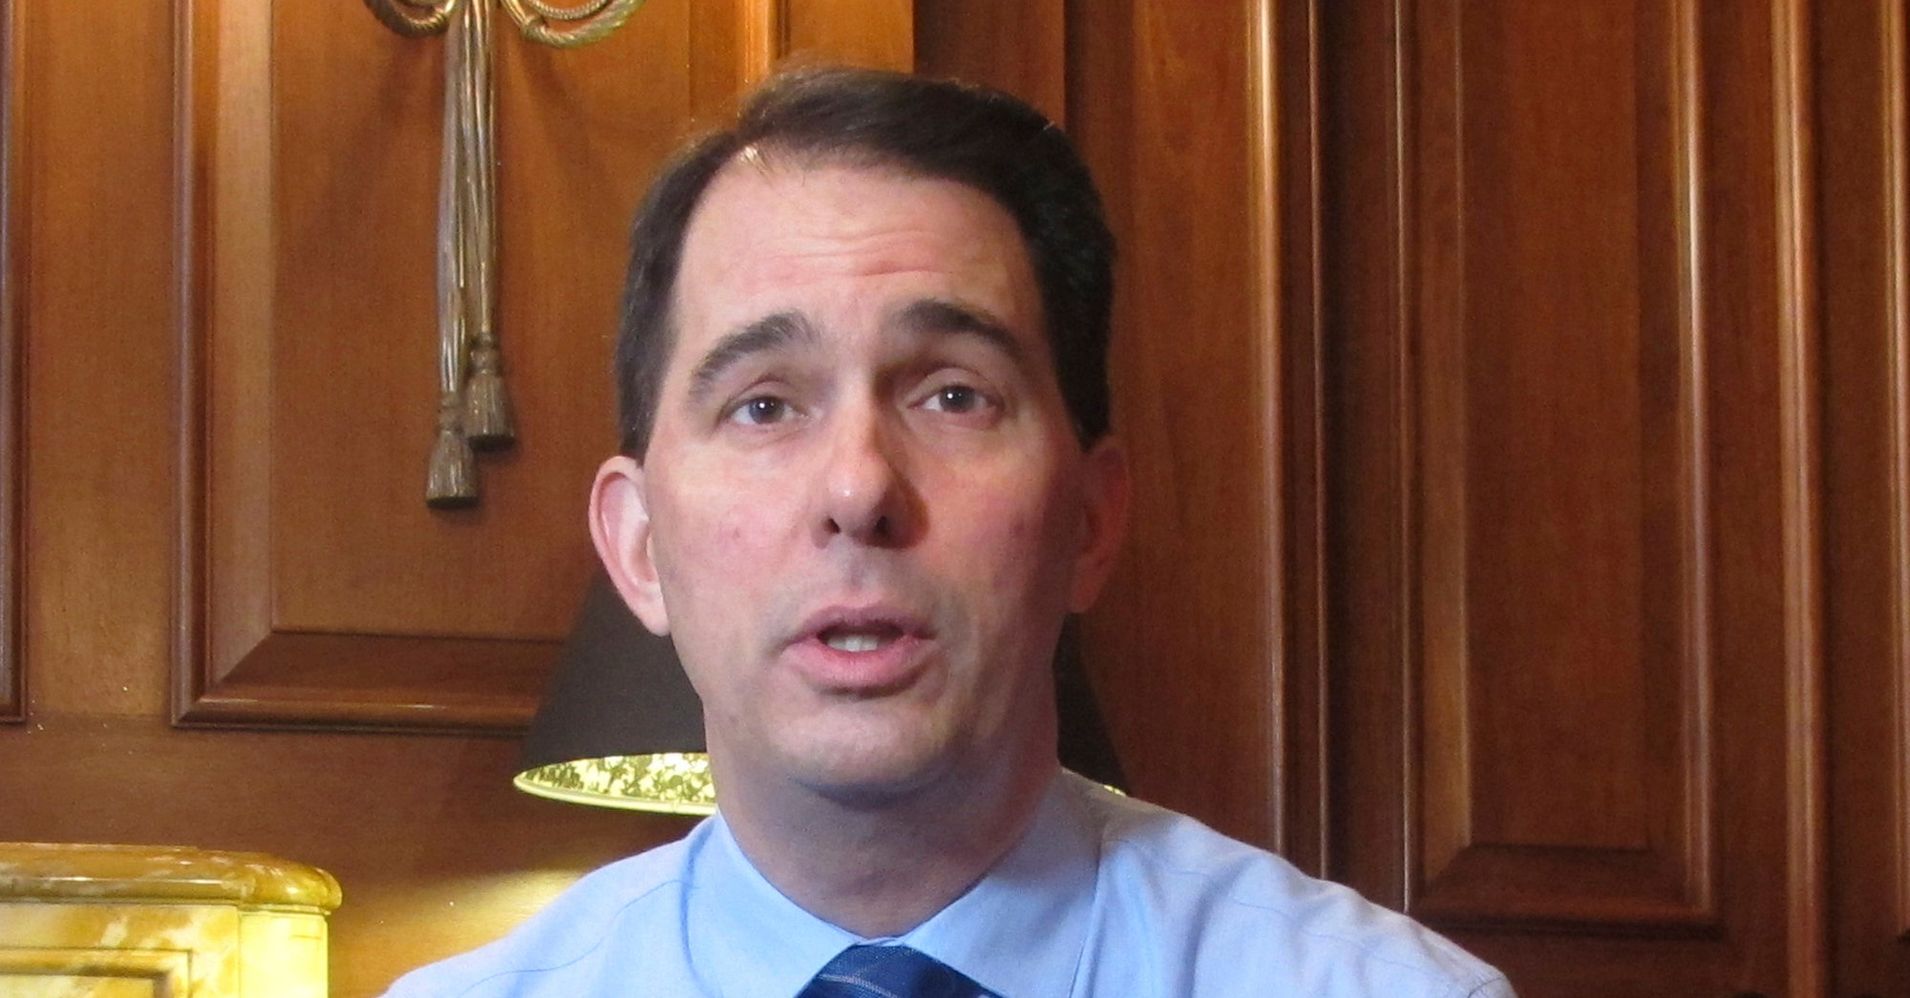 twitter-users-slam-scott-walker-after-he-whines-about-taxing-the-rich